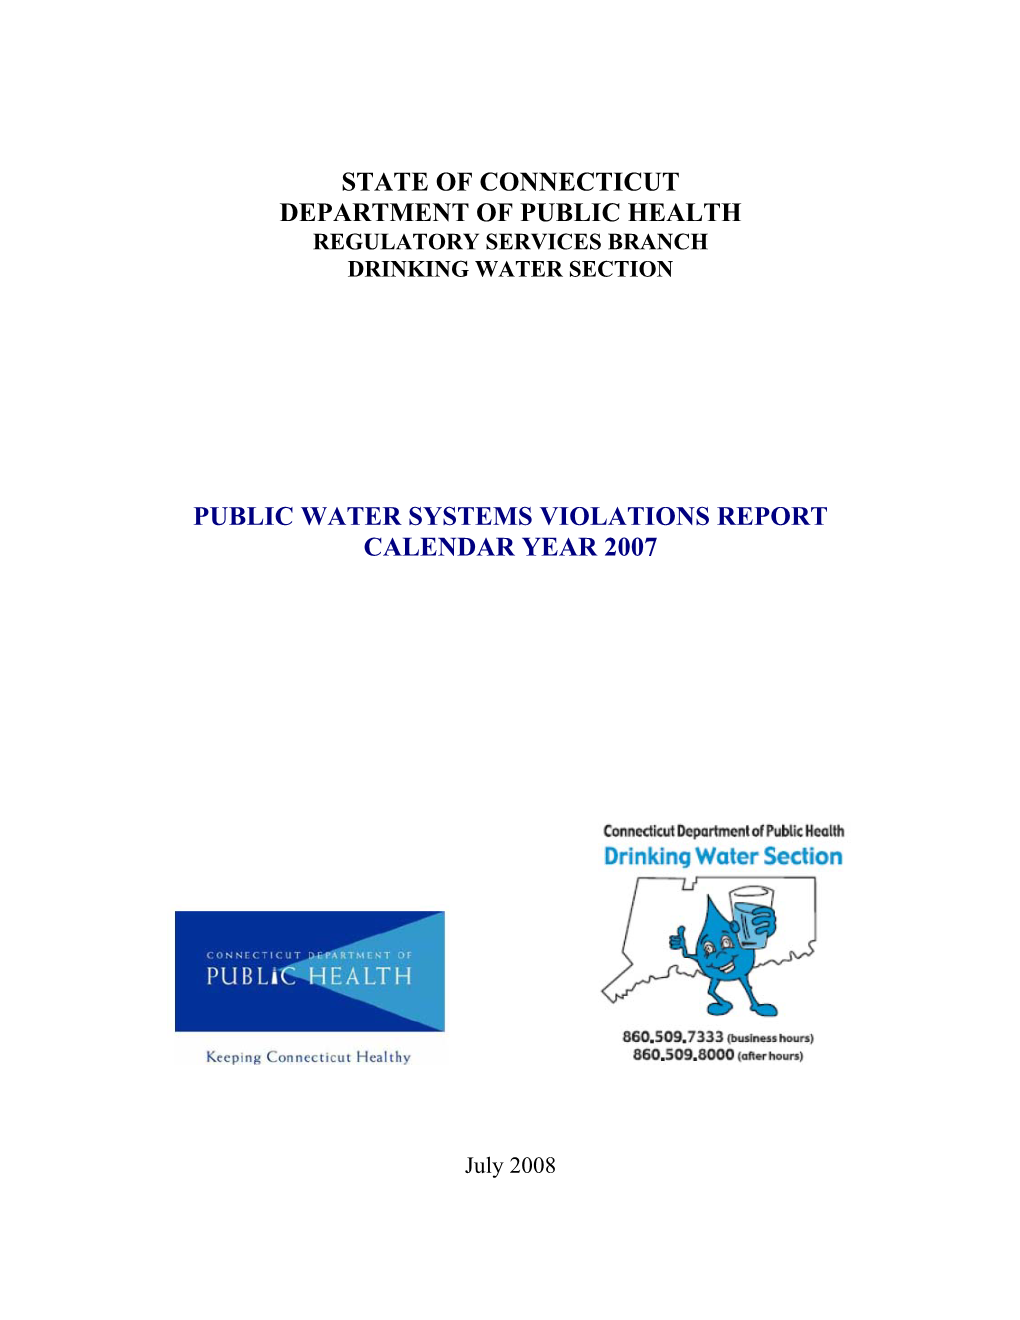 2007 Public Water System Violation Report